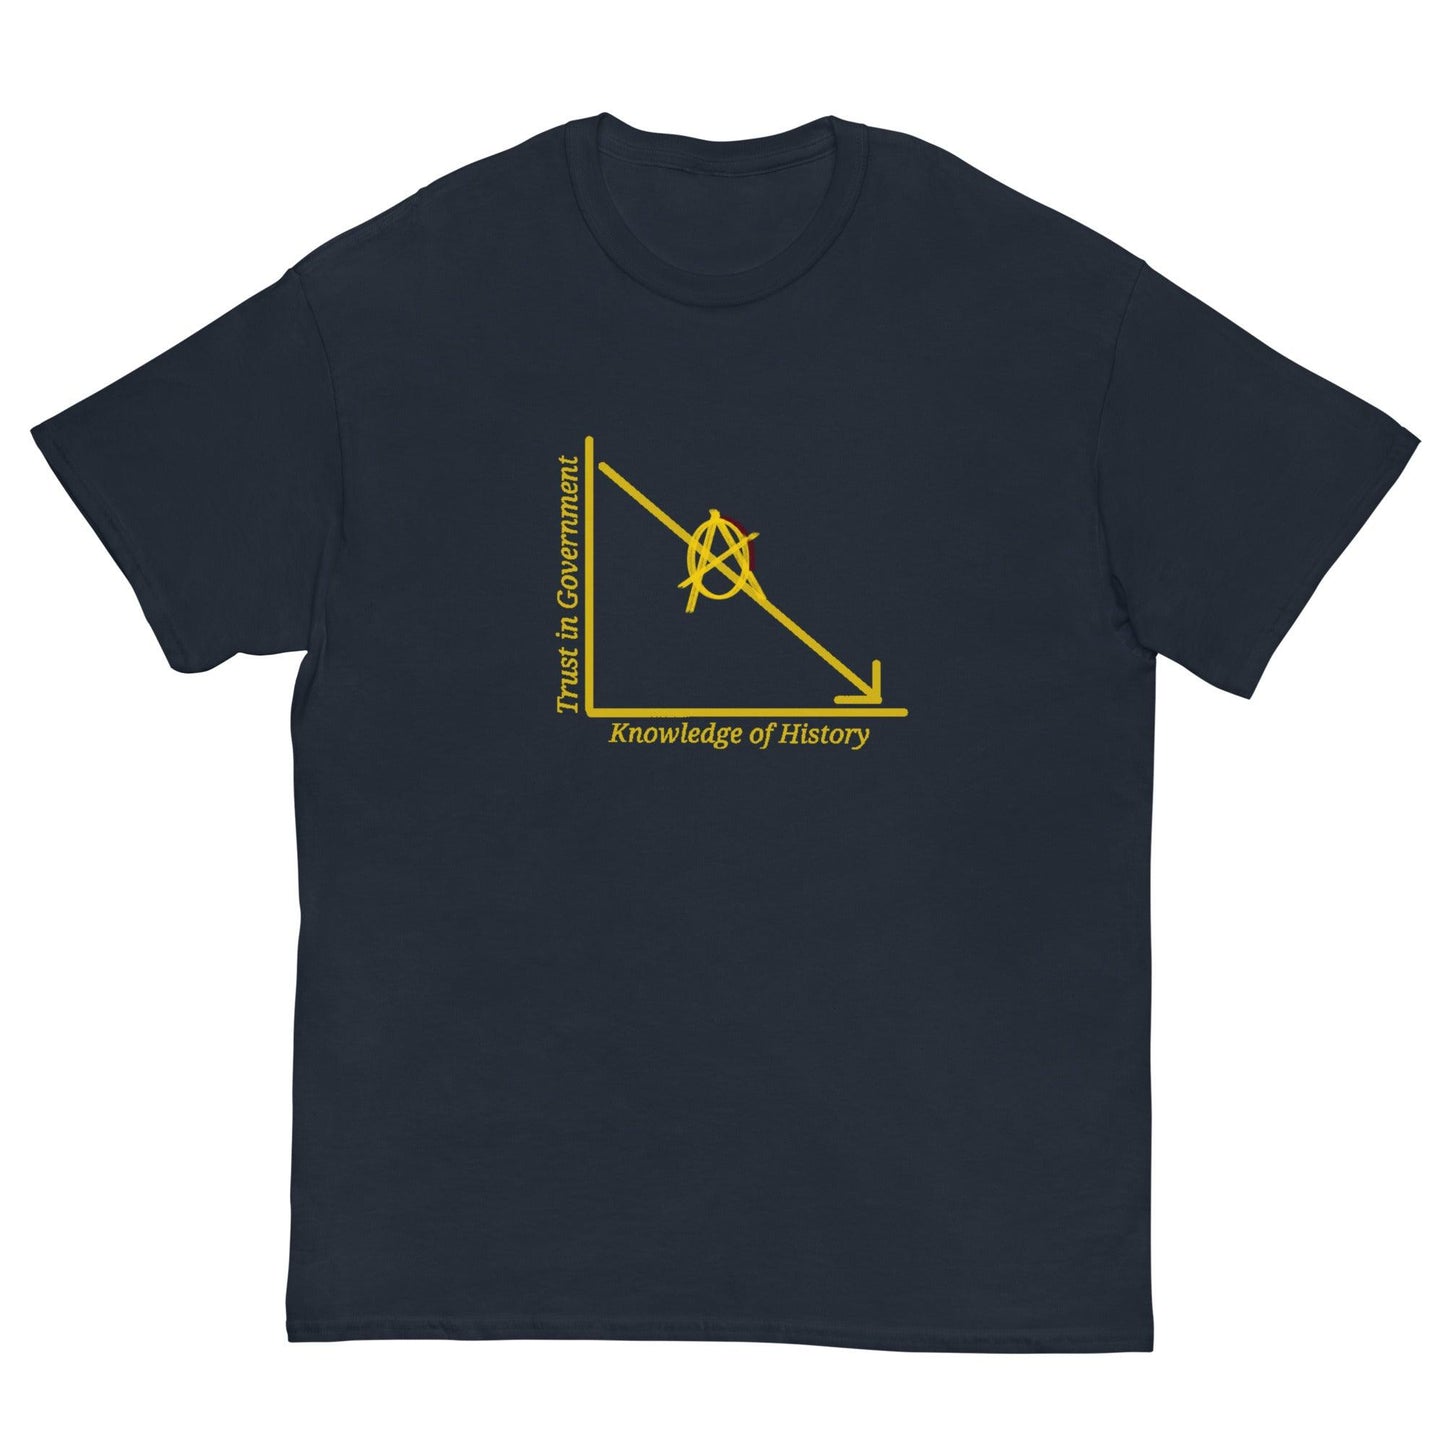 Anarchy "Trust in Government" Gold Classic tee - AnarchyWear